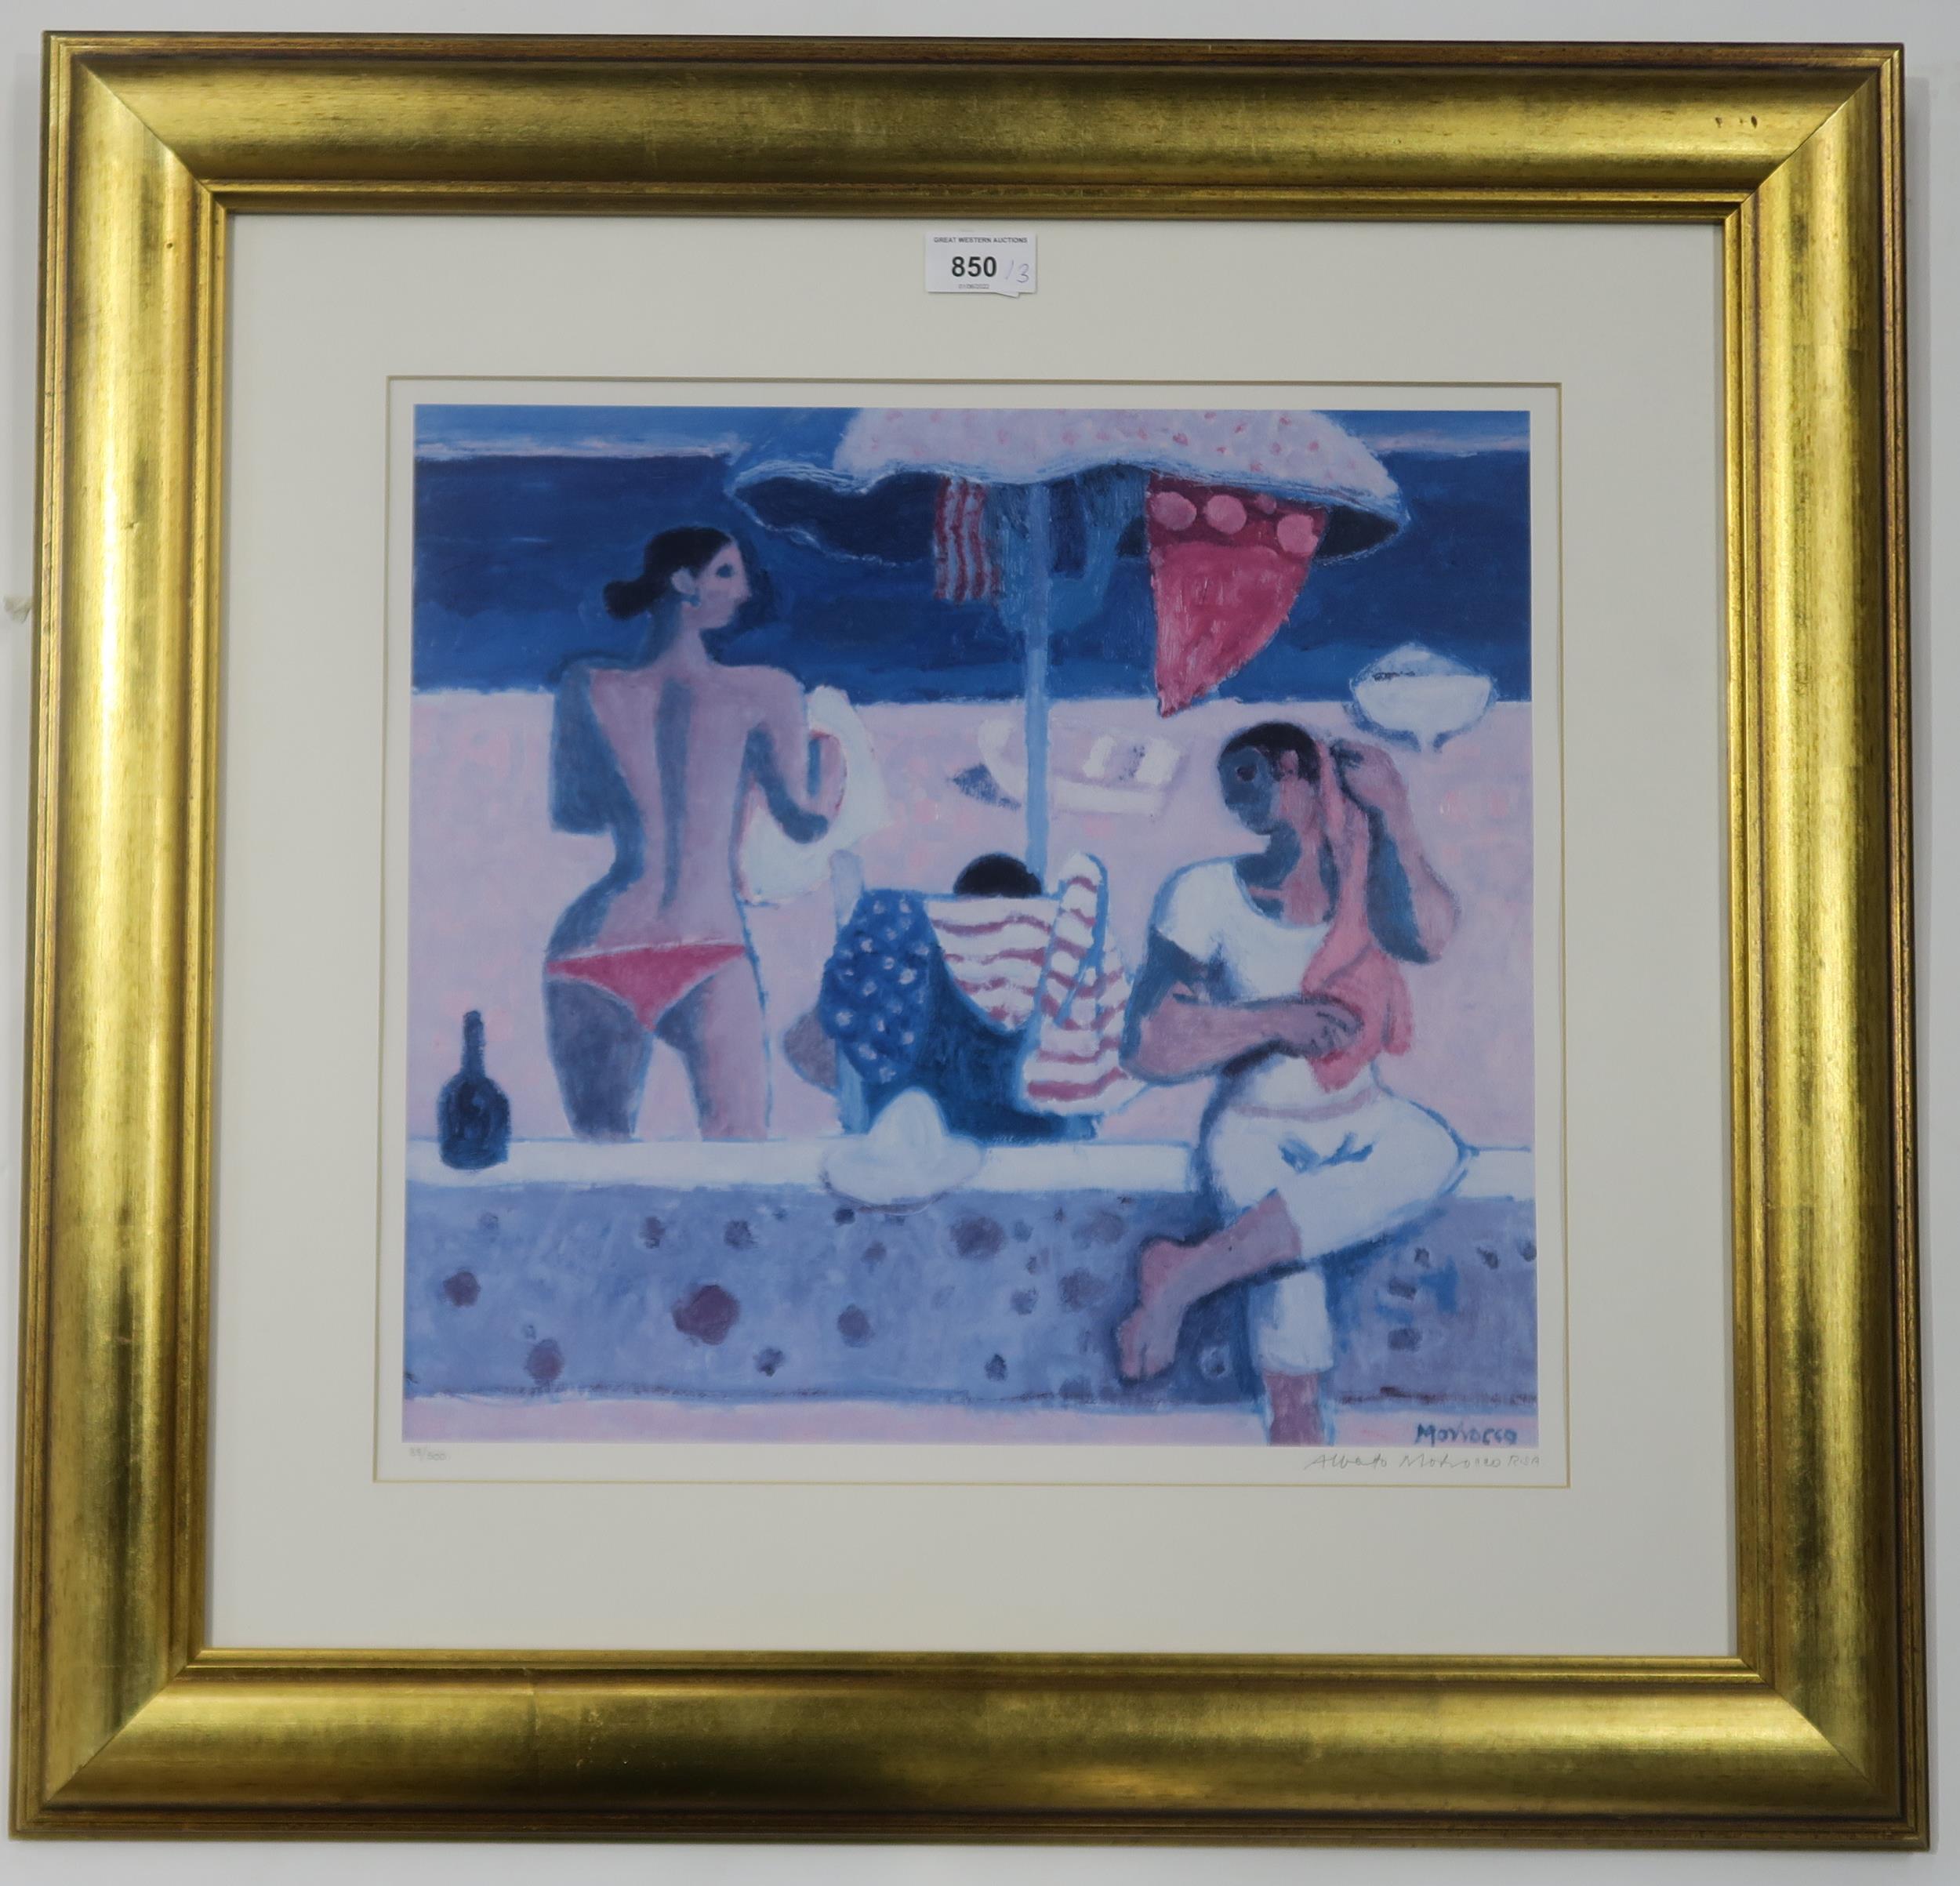 ALBERTO MORROCCO (SCOTTISH 1917-1998) ON THE BEACH  Print multiple, signed lower right in - Image 2 of 5